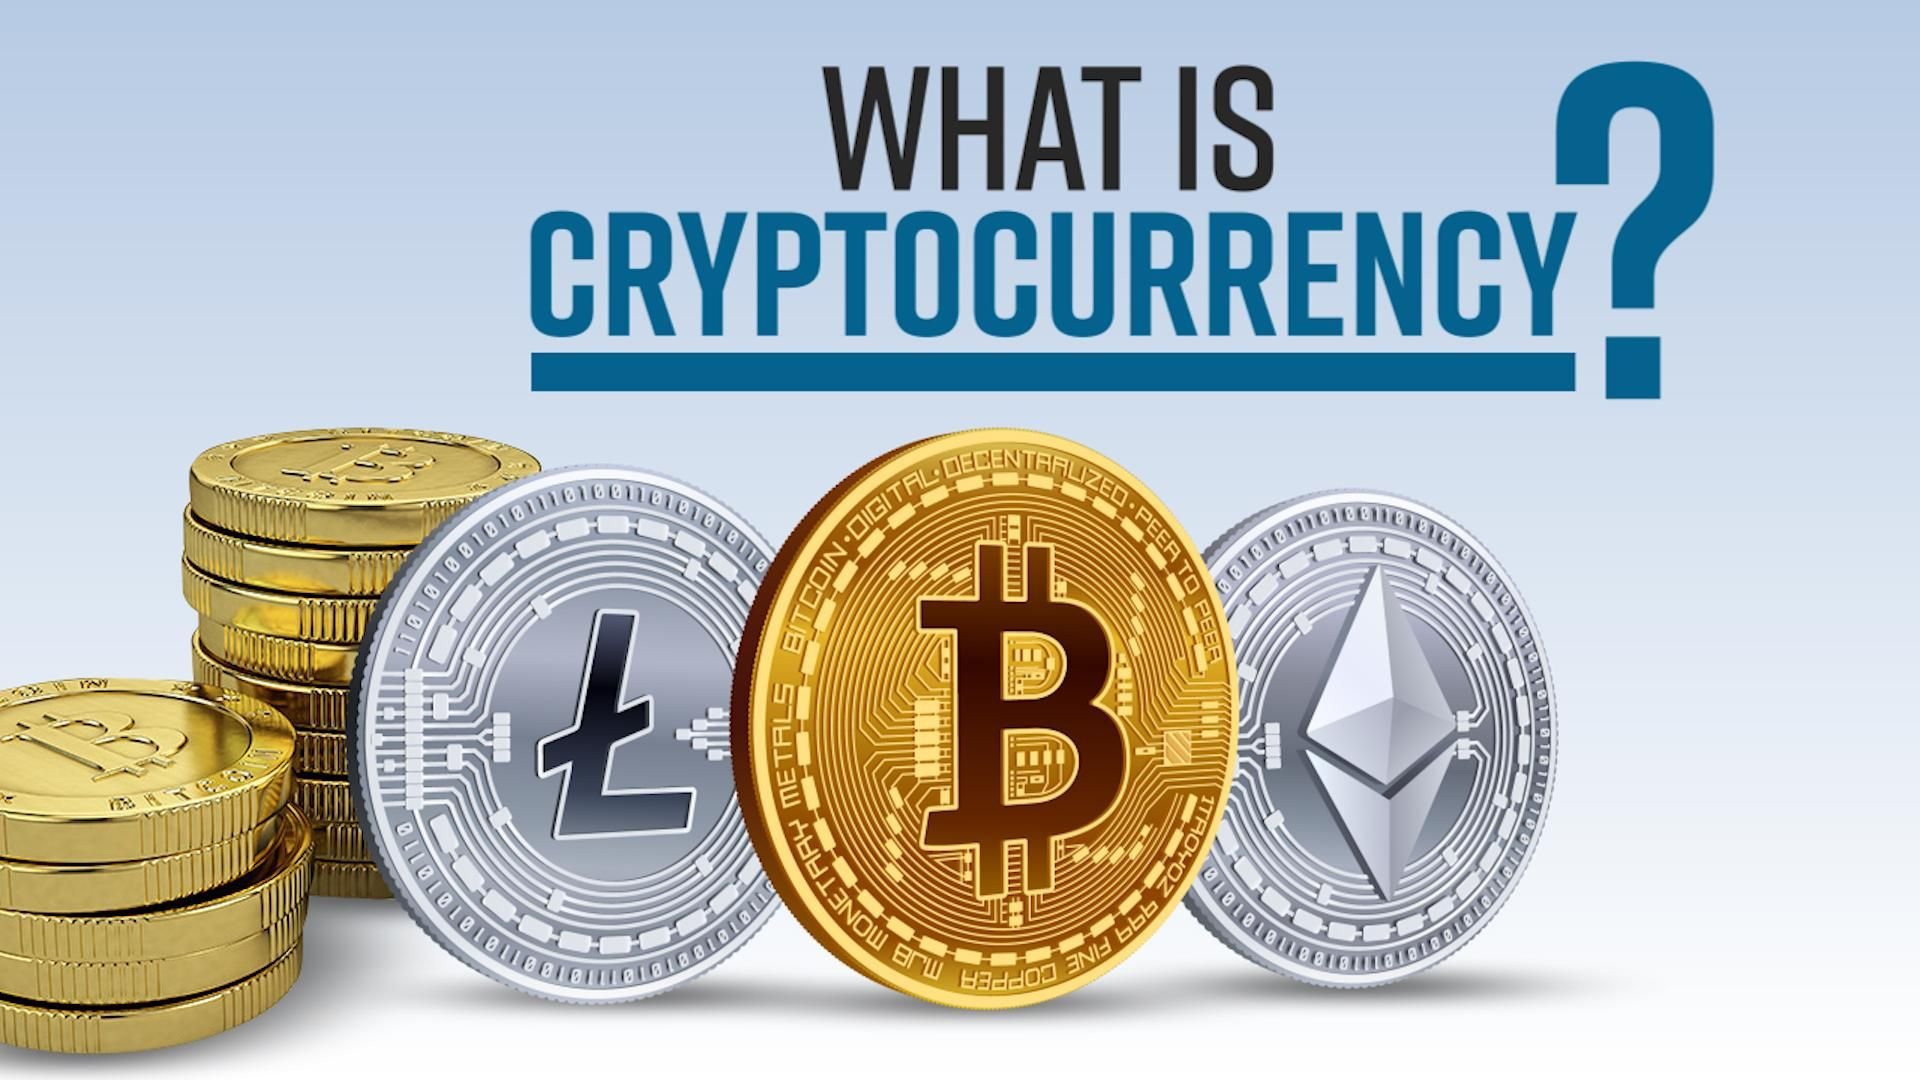 Cryptocurrency: Is It the Future of Money?